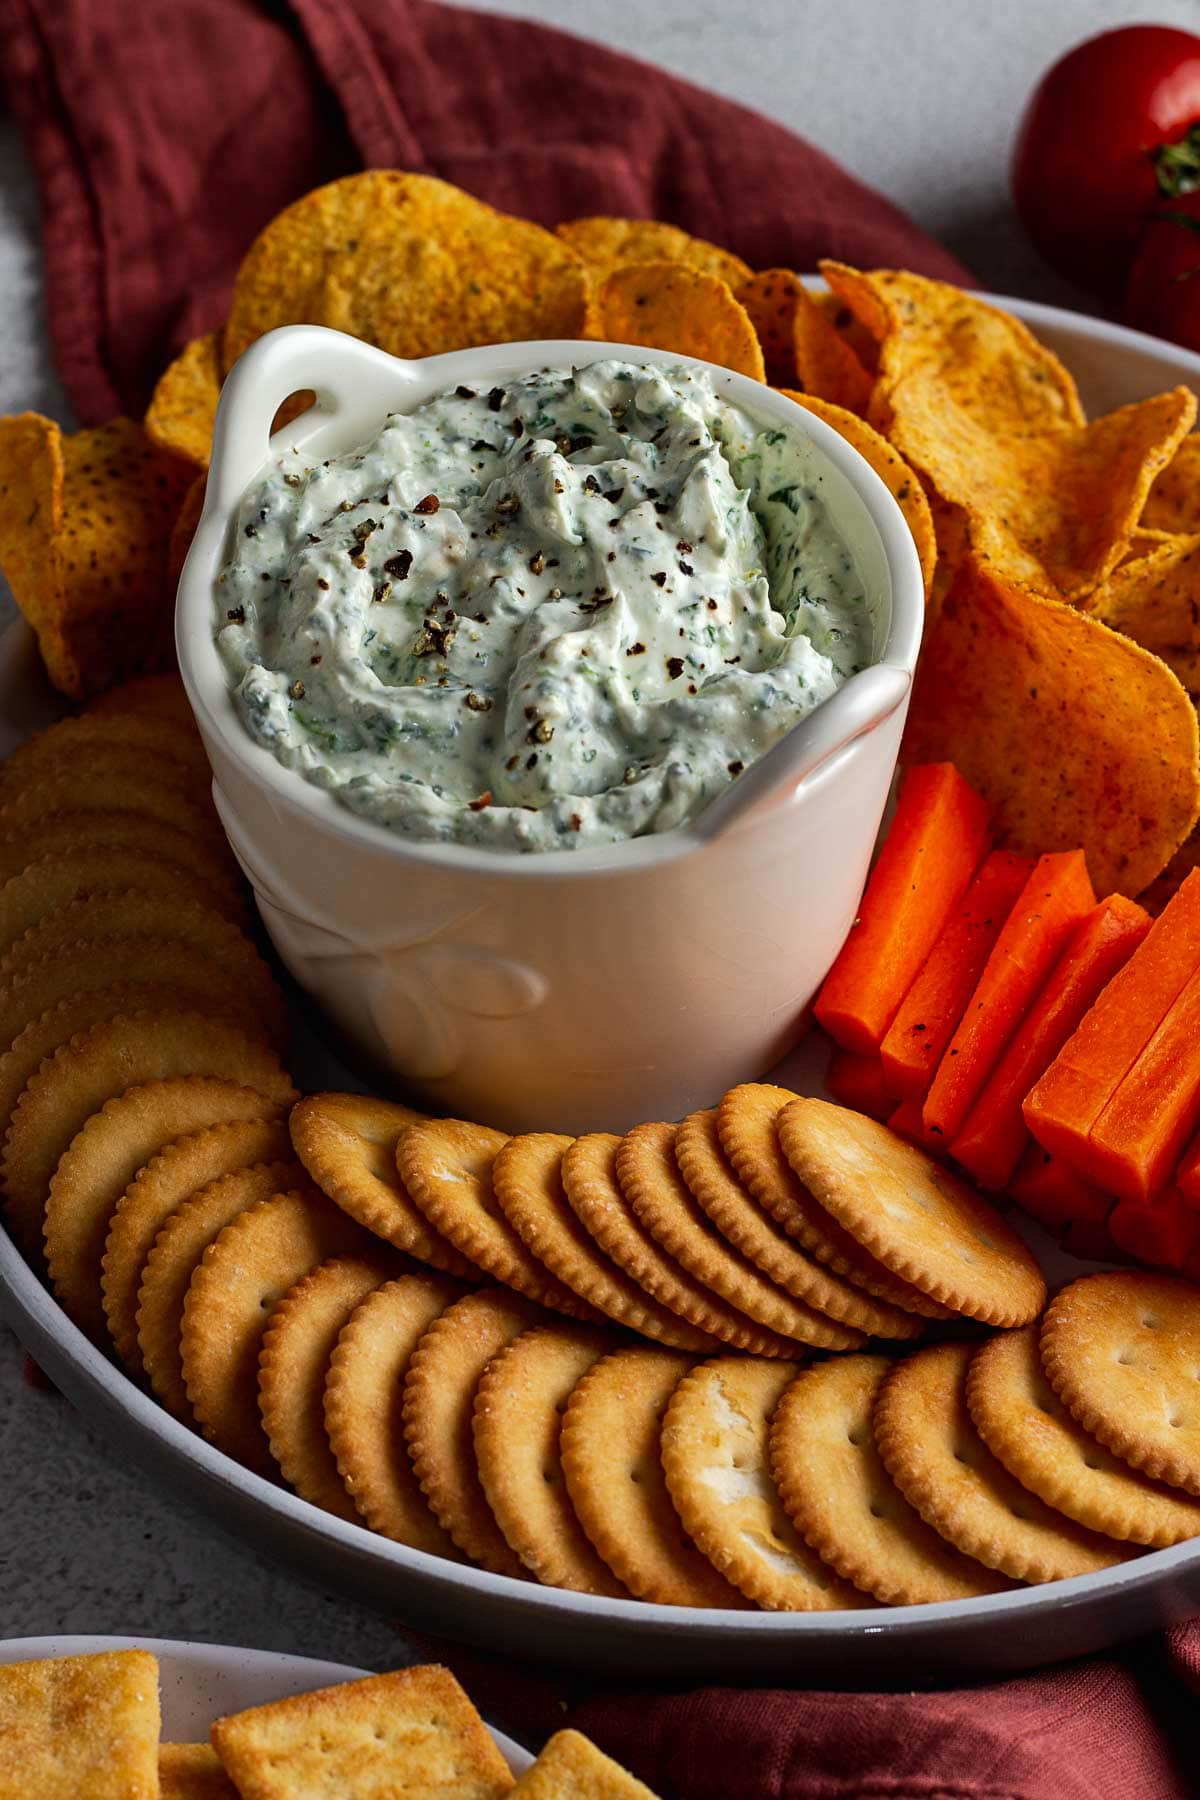 Spinach and Feta Dip surrounded by crackers, chips and carrot.